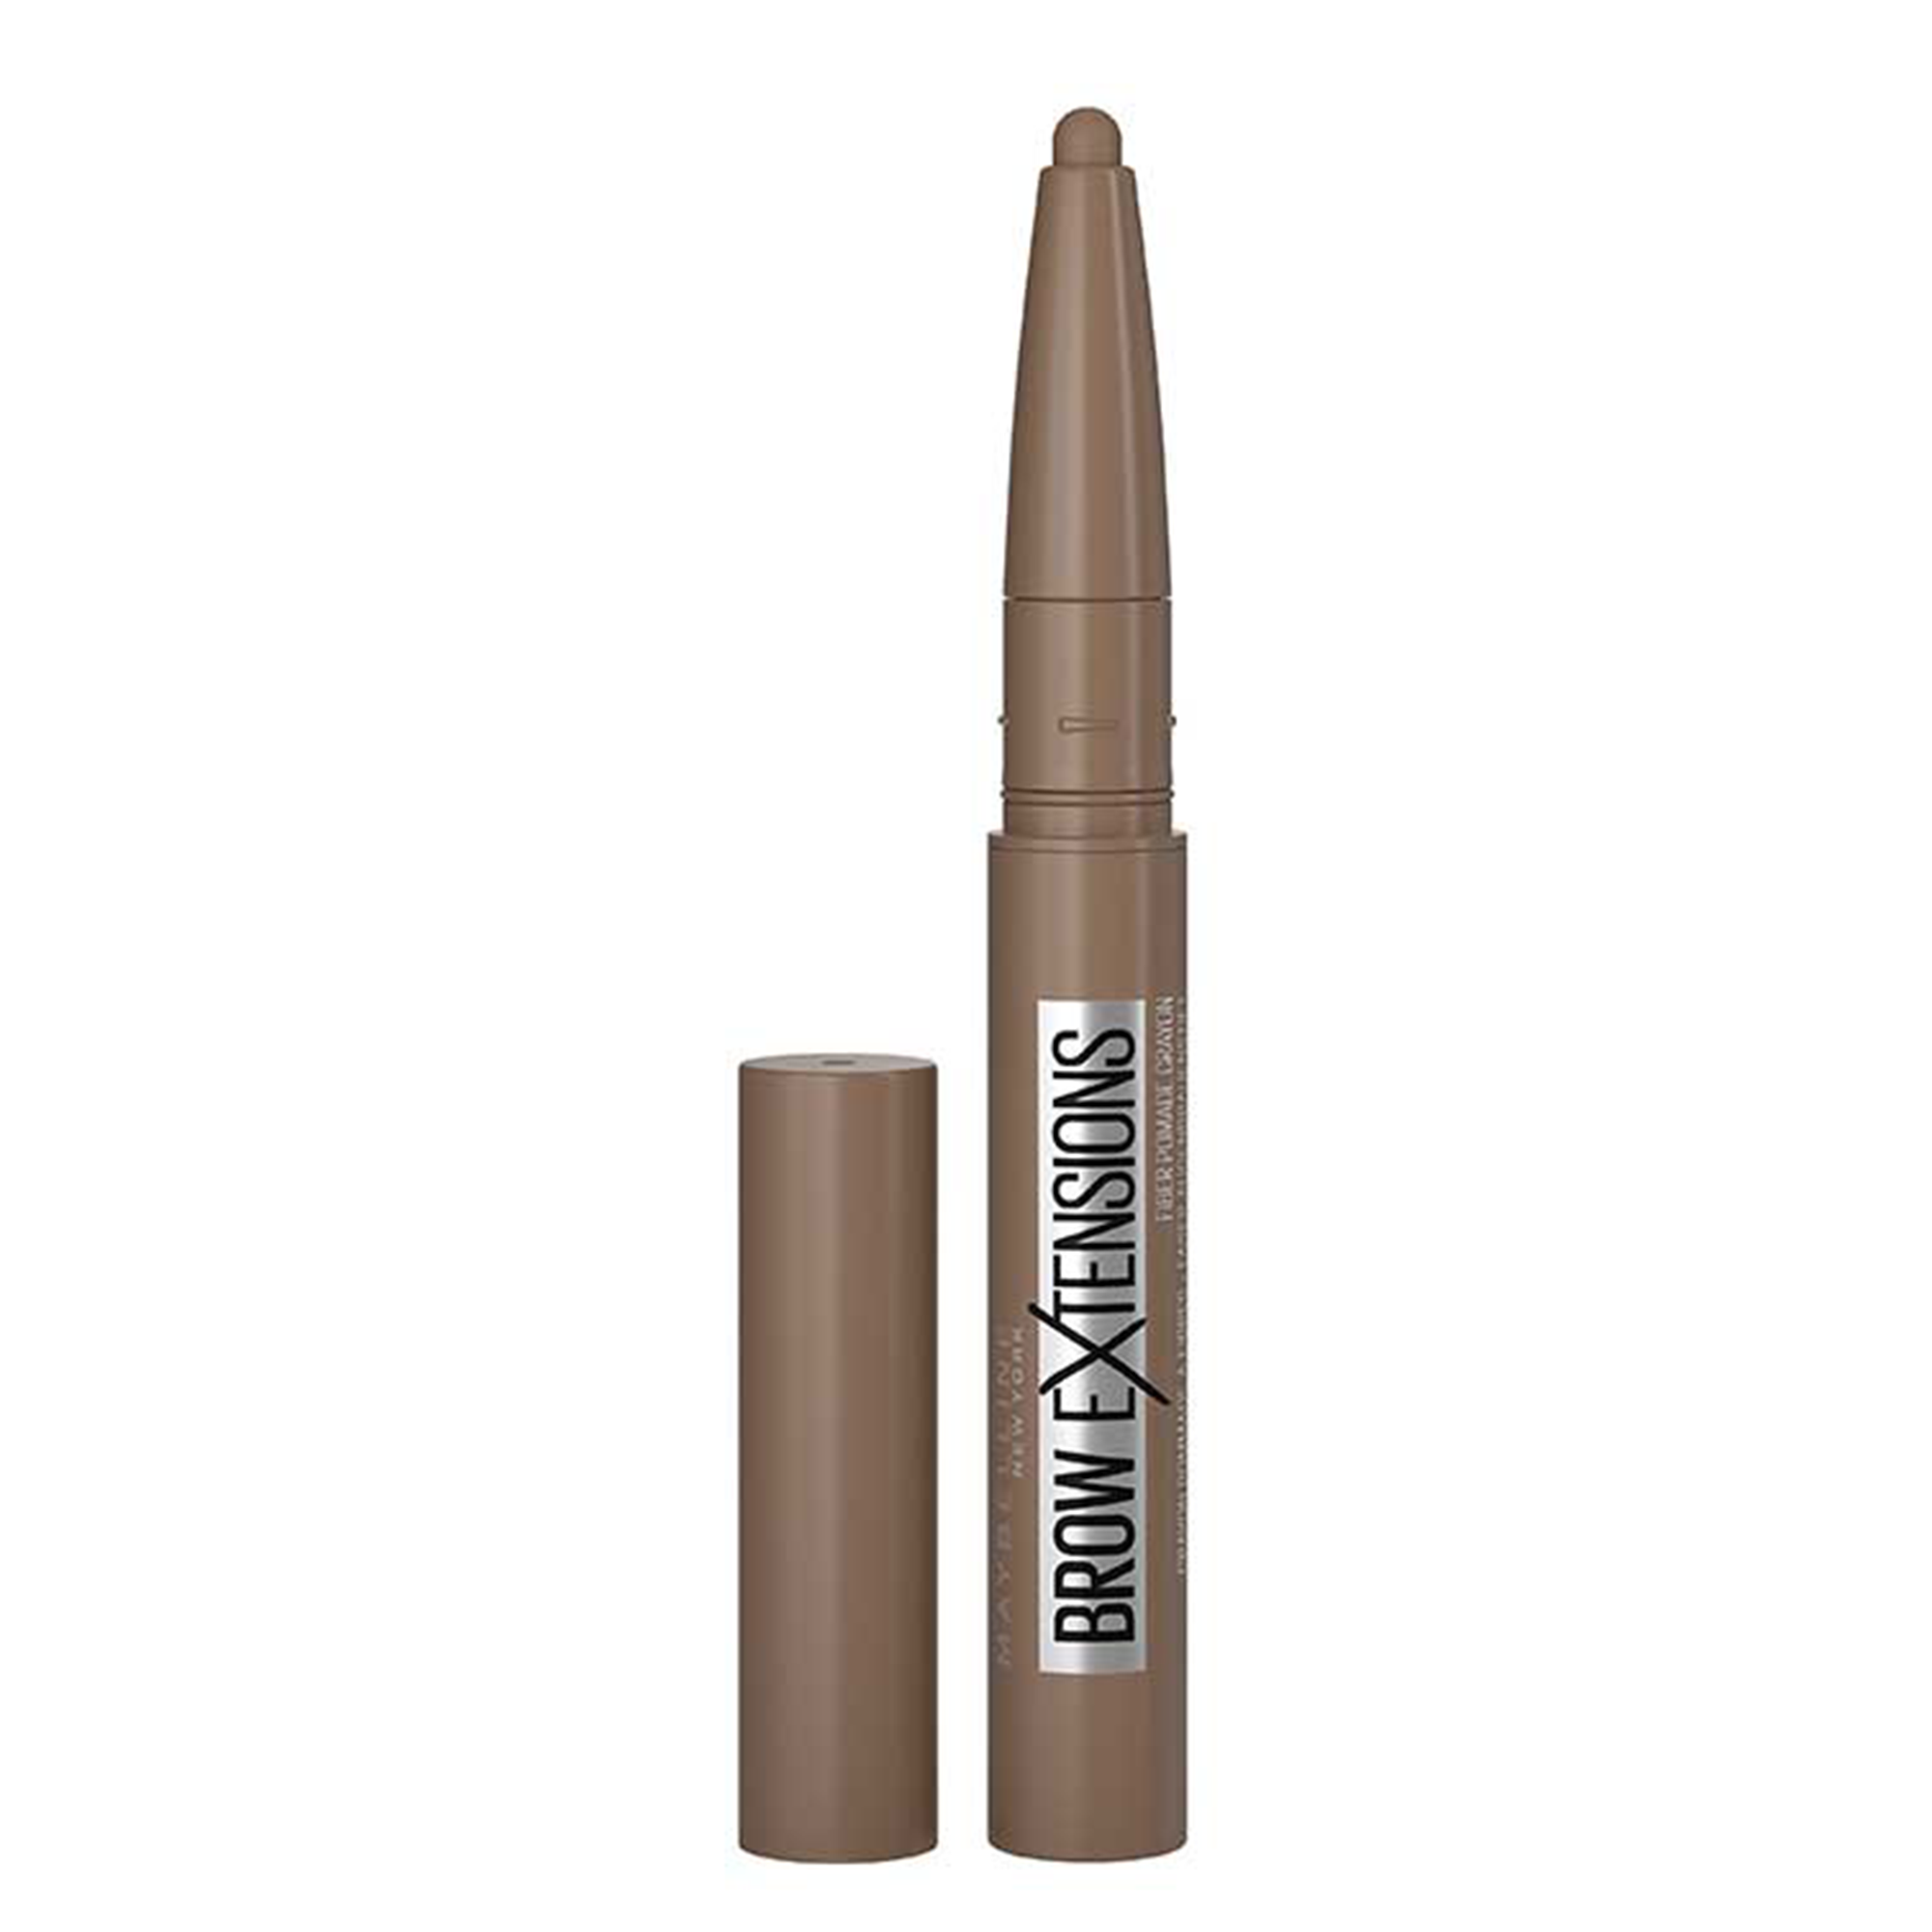 [B-GRADE] Maybelline Brow Extensions Fiber Pomade Crayon - 02 Soft Brown